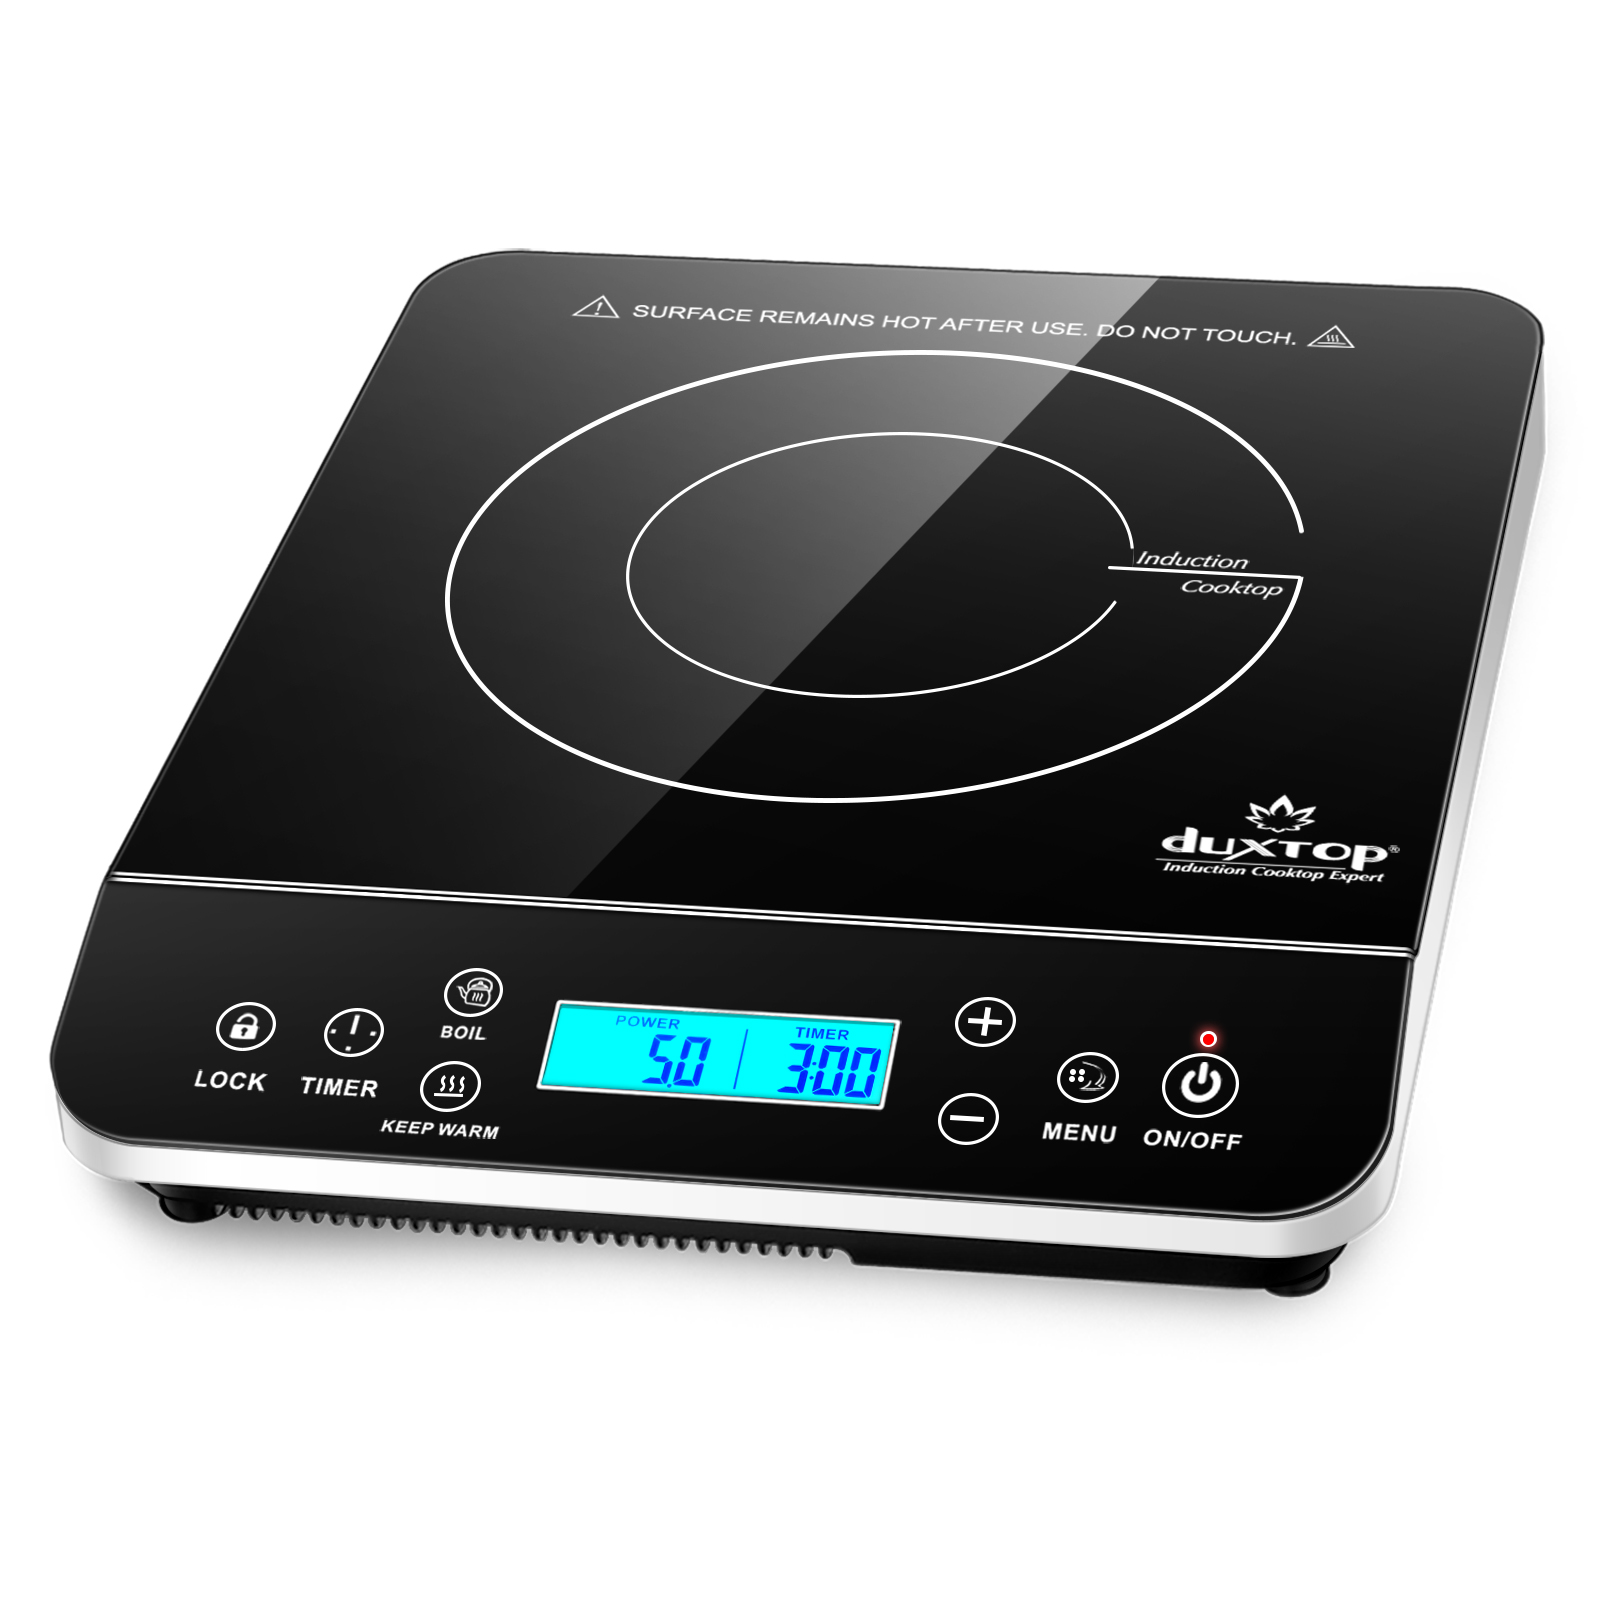 Duxtop Portable Induction Cooktop, Countertop Burner Induction Hot Plate  with LCD Sensor Touch 1800 Watts, Silver 9600LS/BT-200DZ - The Secura